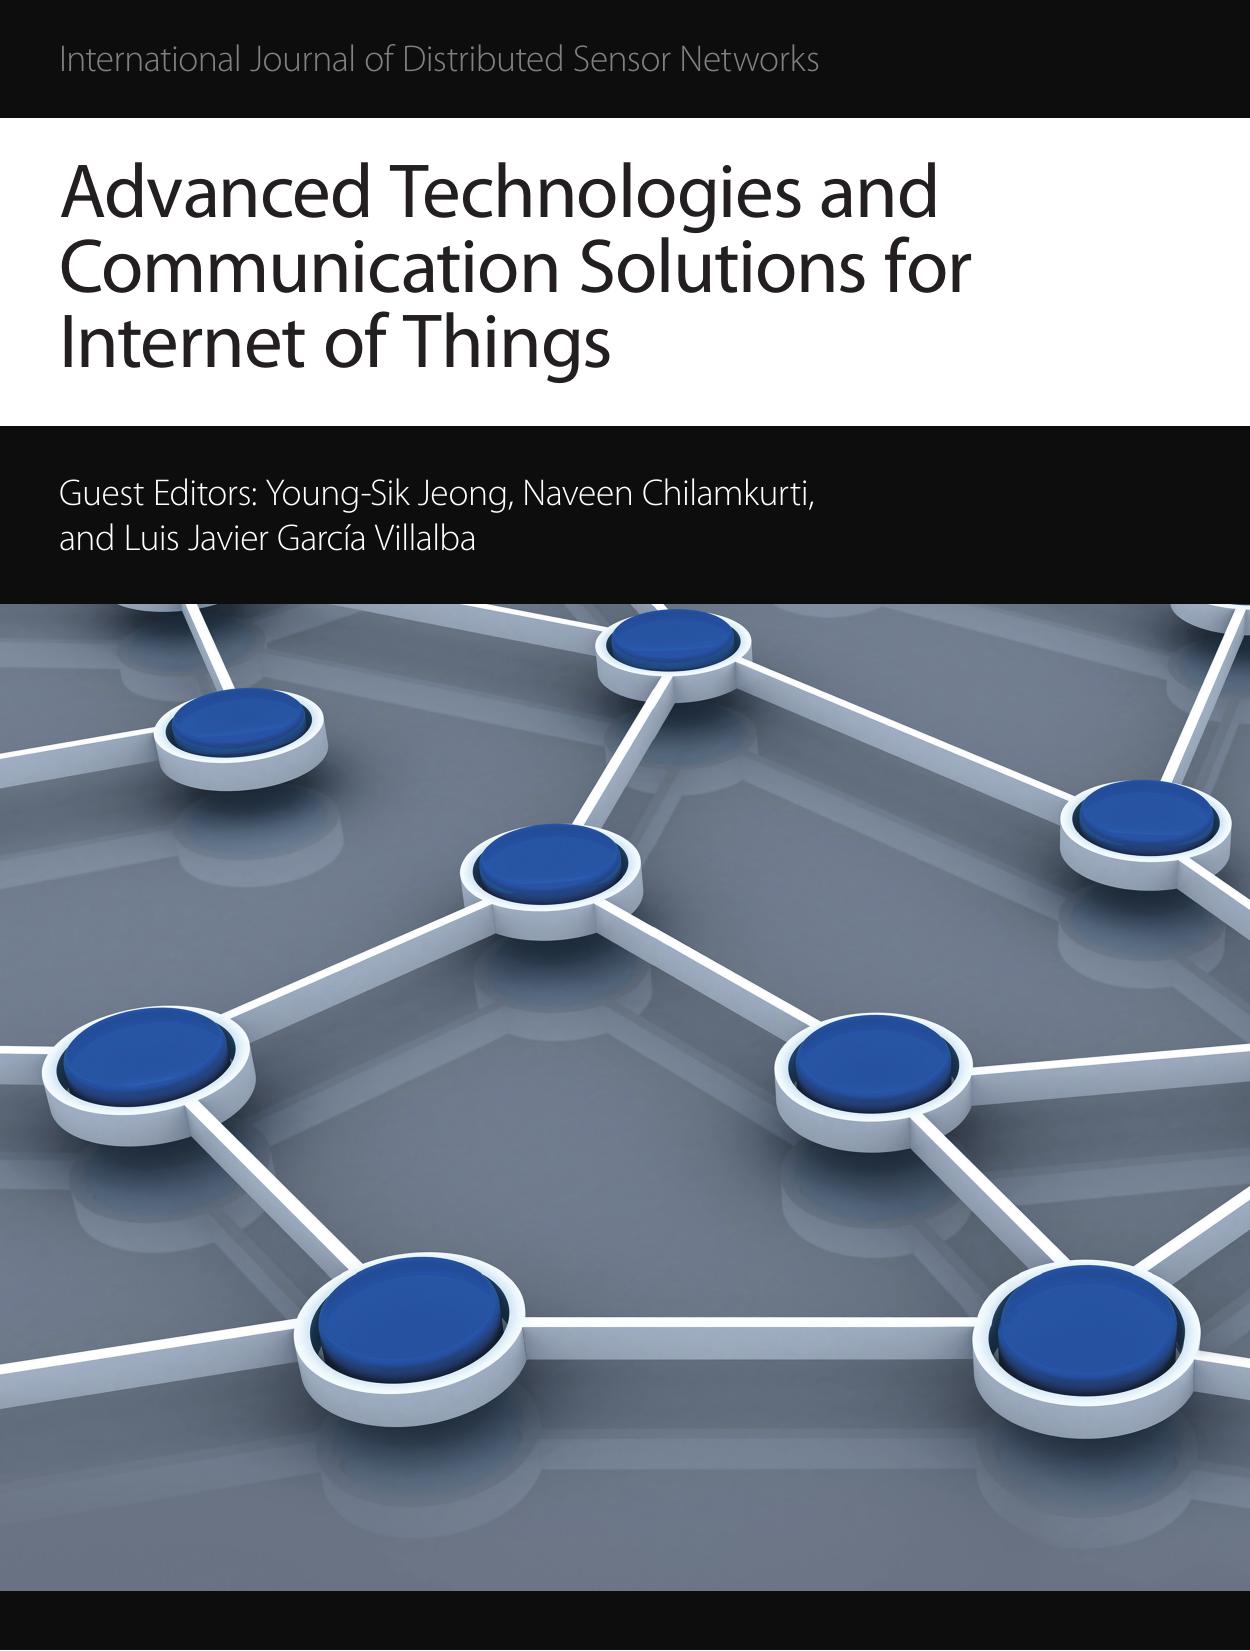 Advanced Technologies and Communication Solutions for Internet of Things 2014